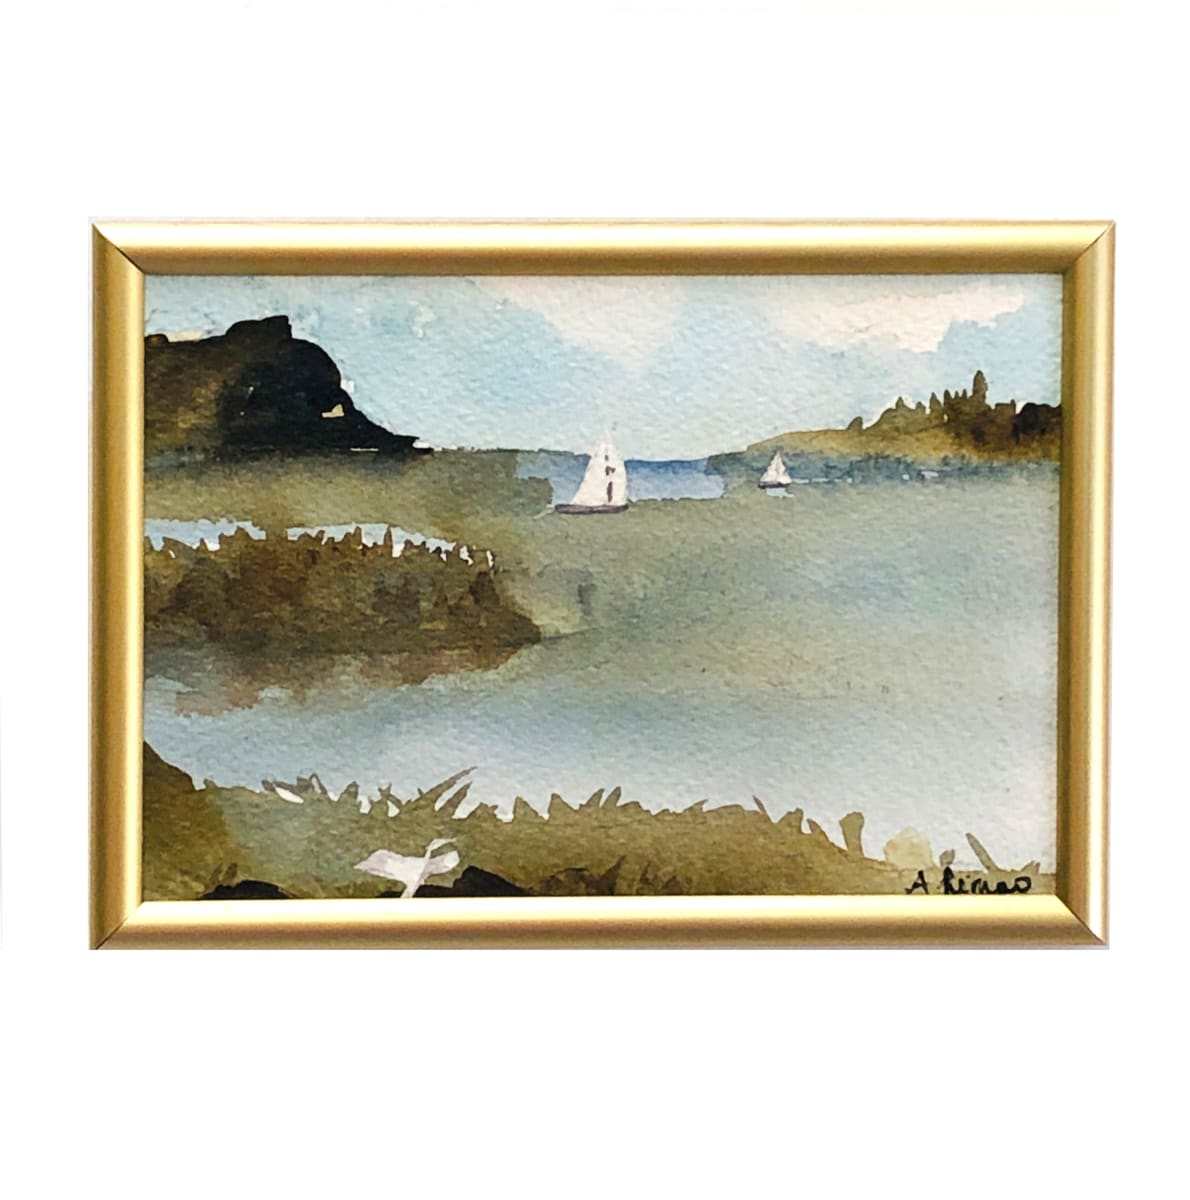 Wetland Wonders III by April Rimpo  Image: 5" X 7" painting in Frosted Gold low profile frame